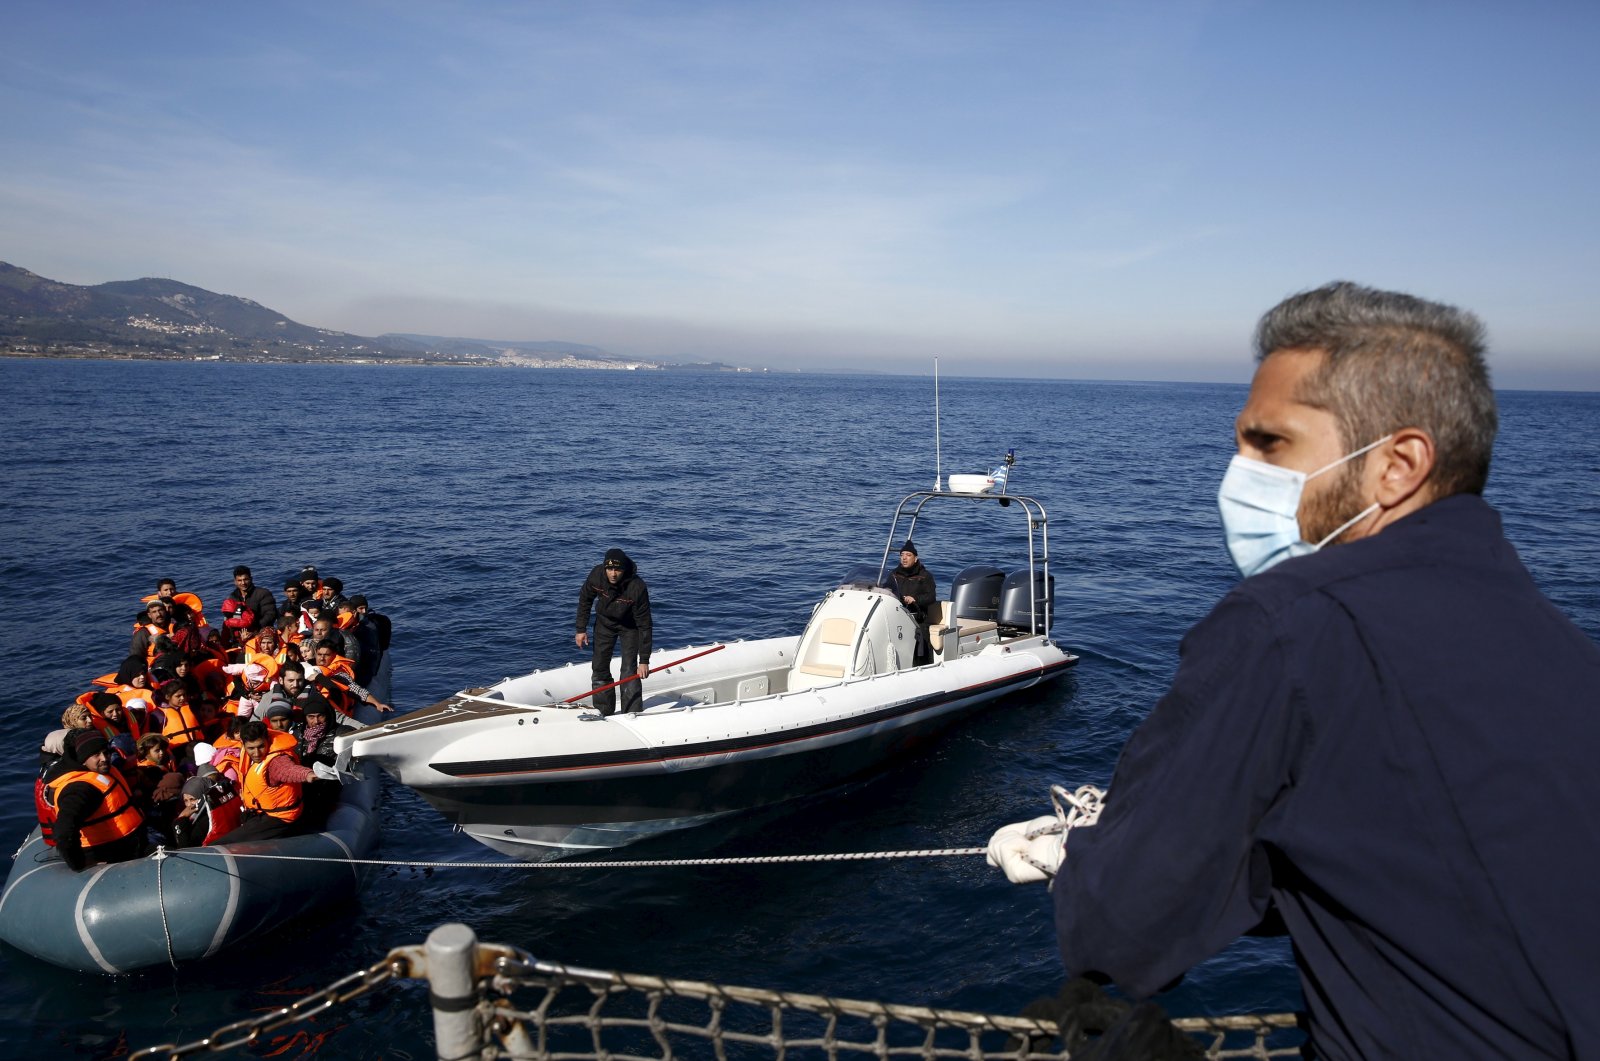 Greek Coast Guard officers tug a dinghy carrying refugees and migrants toward the Ayios Efstratios Coast Guard vessel, during a rescue operation in the open sea between the Turkish coast and the Greek island of Lesbos, Feb. 8, 2016. (Reuters File Photo)